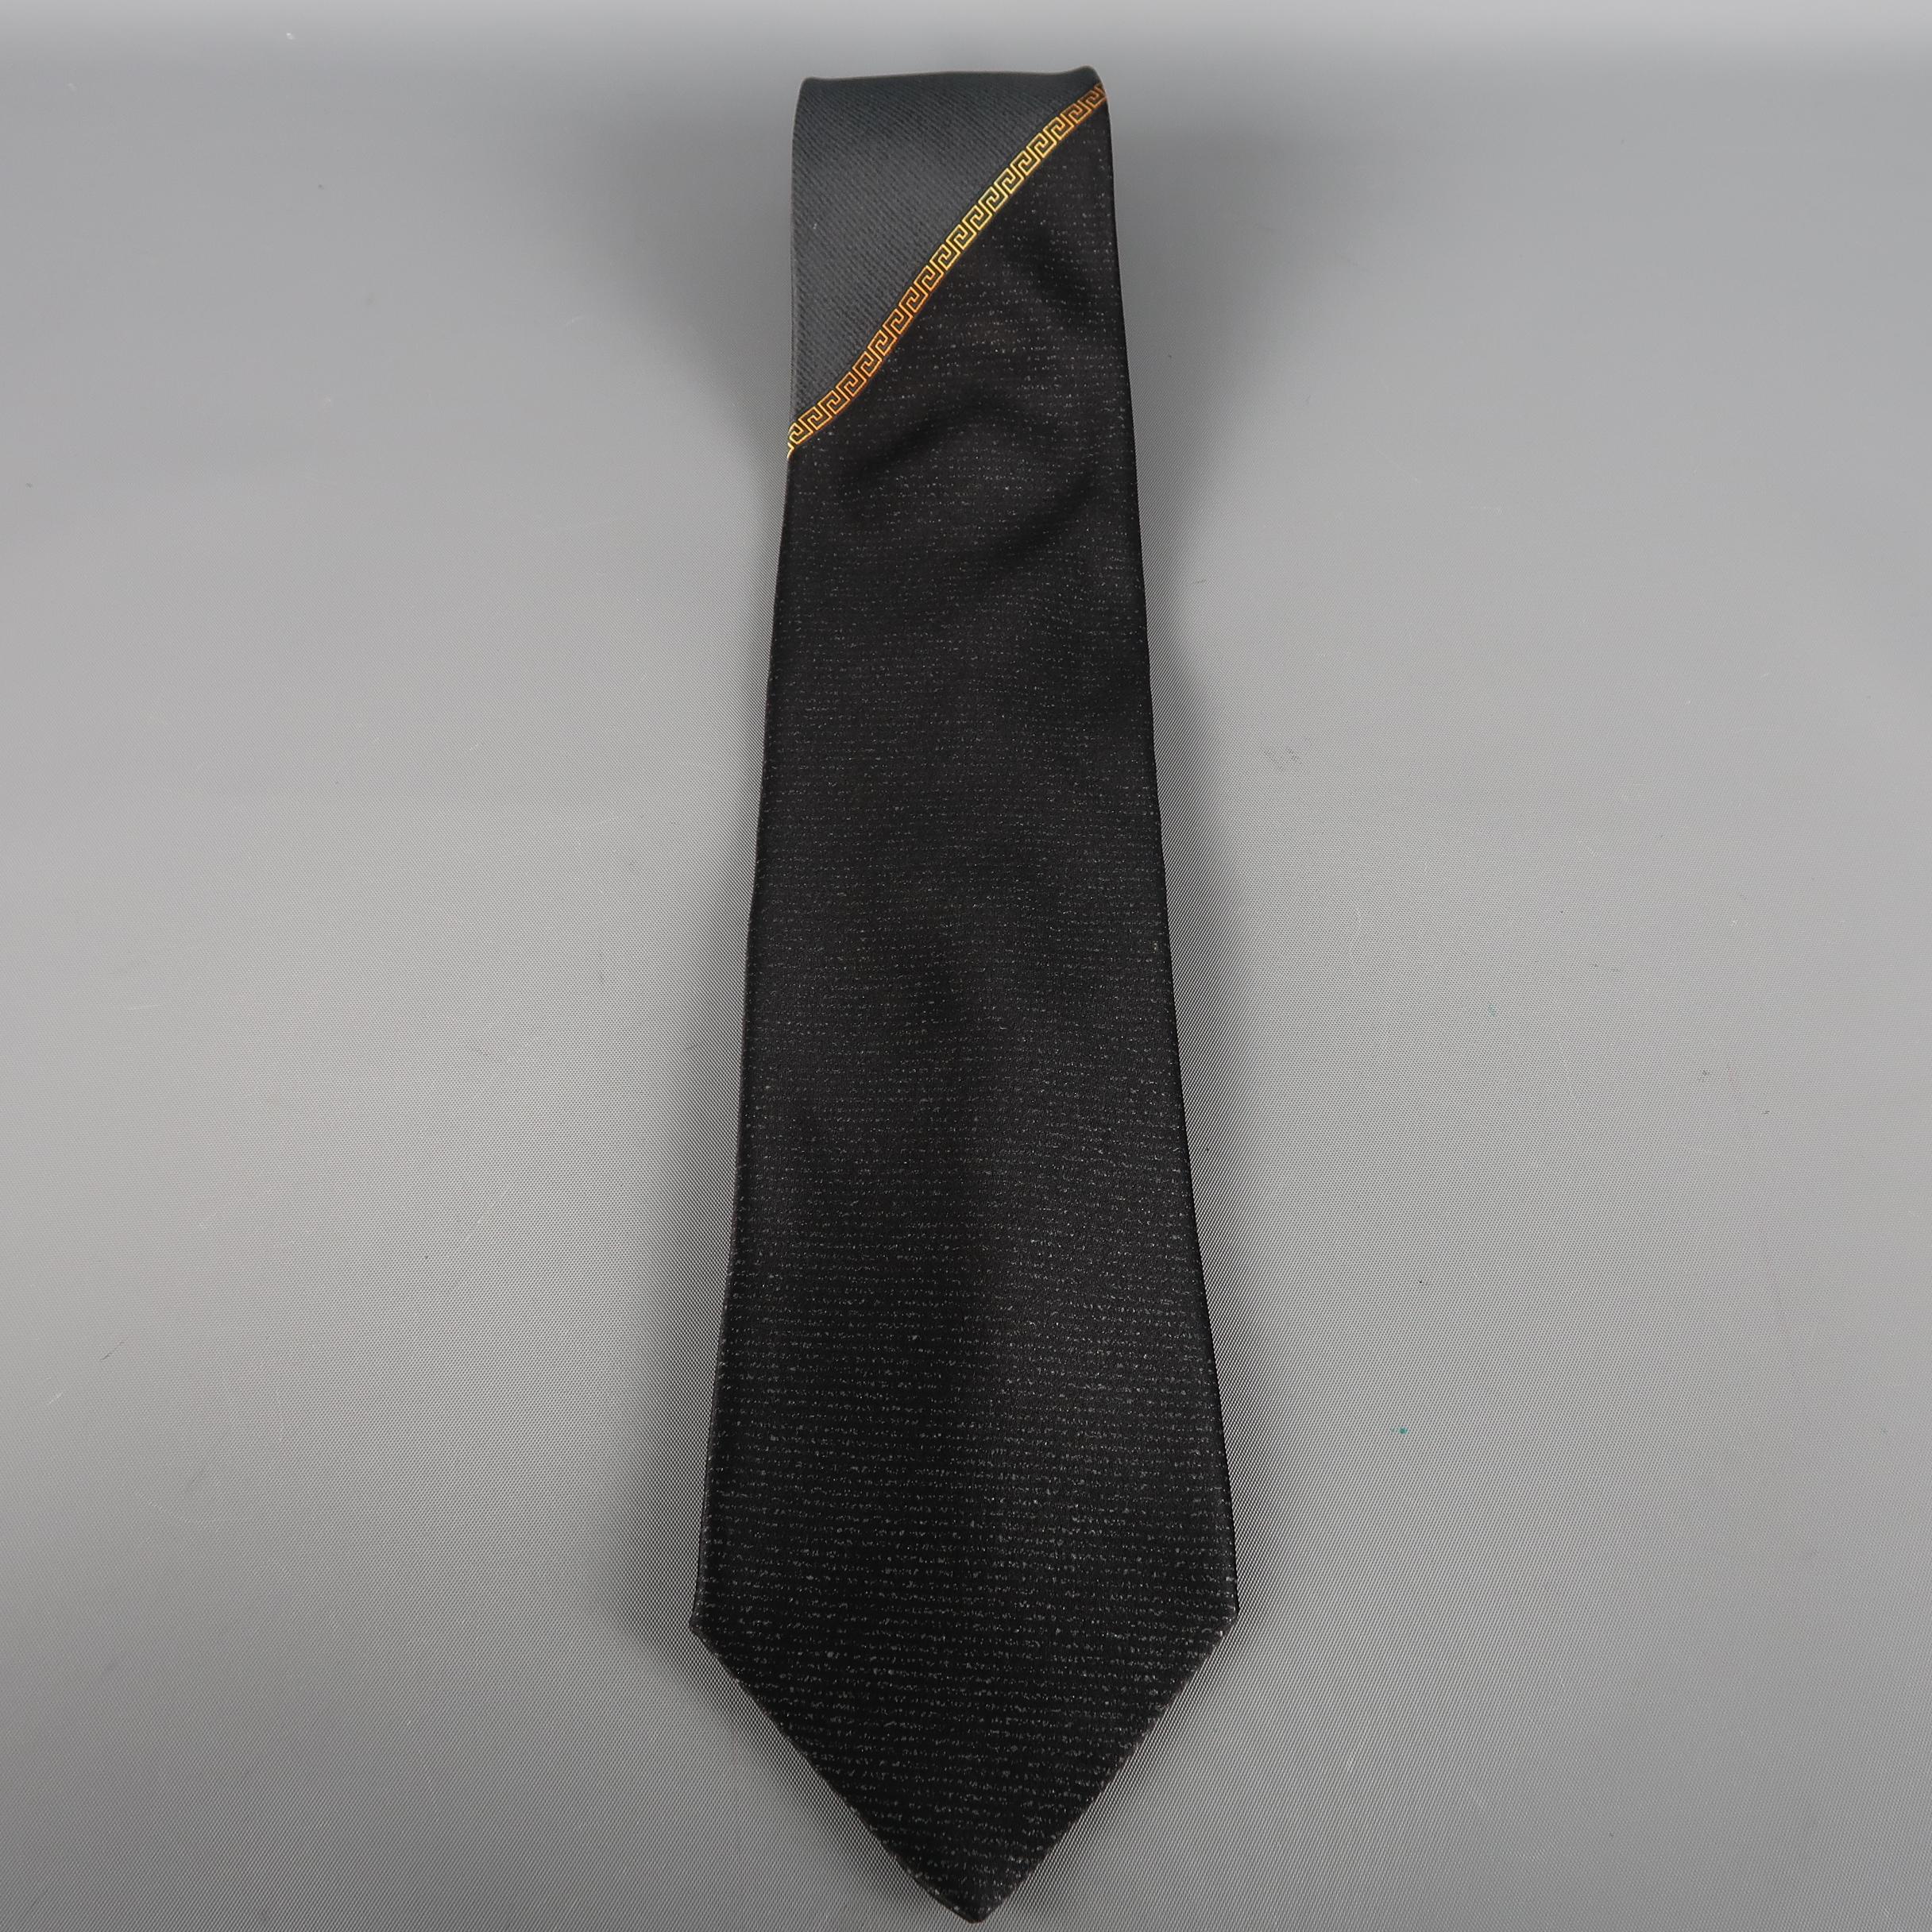 GIANNI VERSACE tie come in charcoal silk in two tones, with a greek key detail. Made in Italy.
 
Excellent Pre-Owned Condition.
 
Width: 3.5 in.